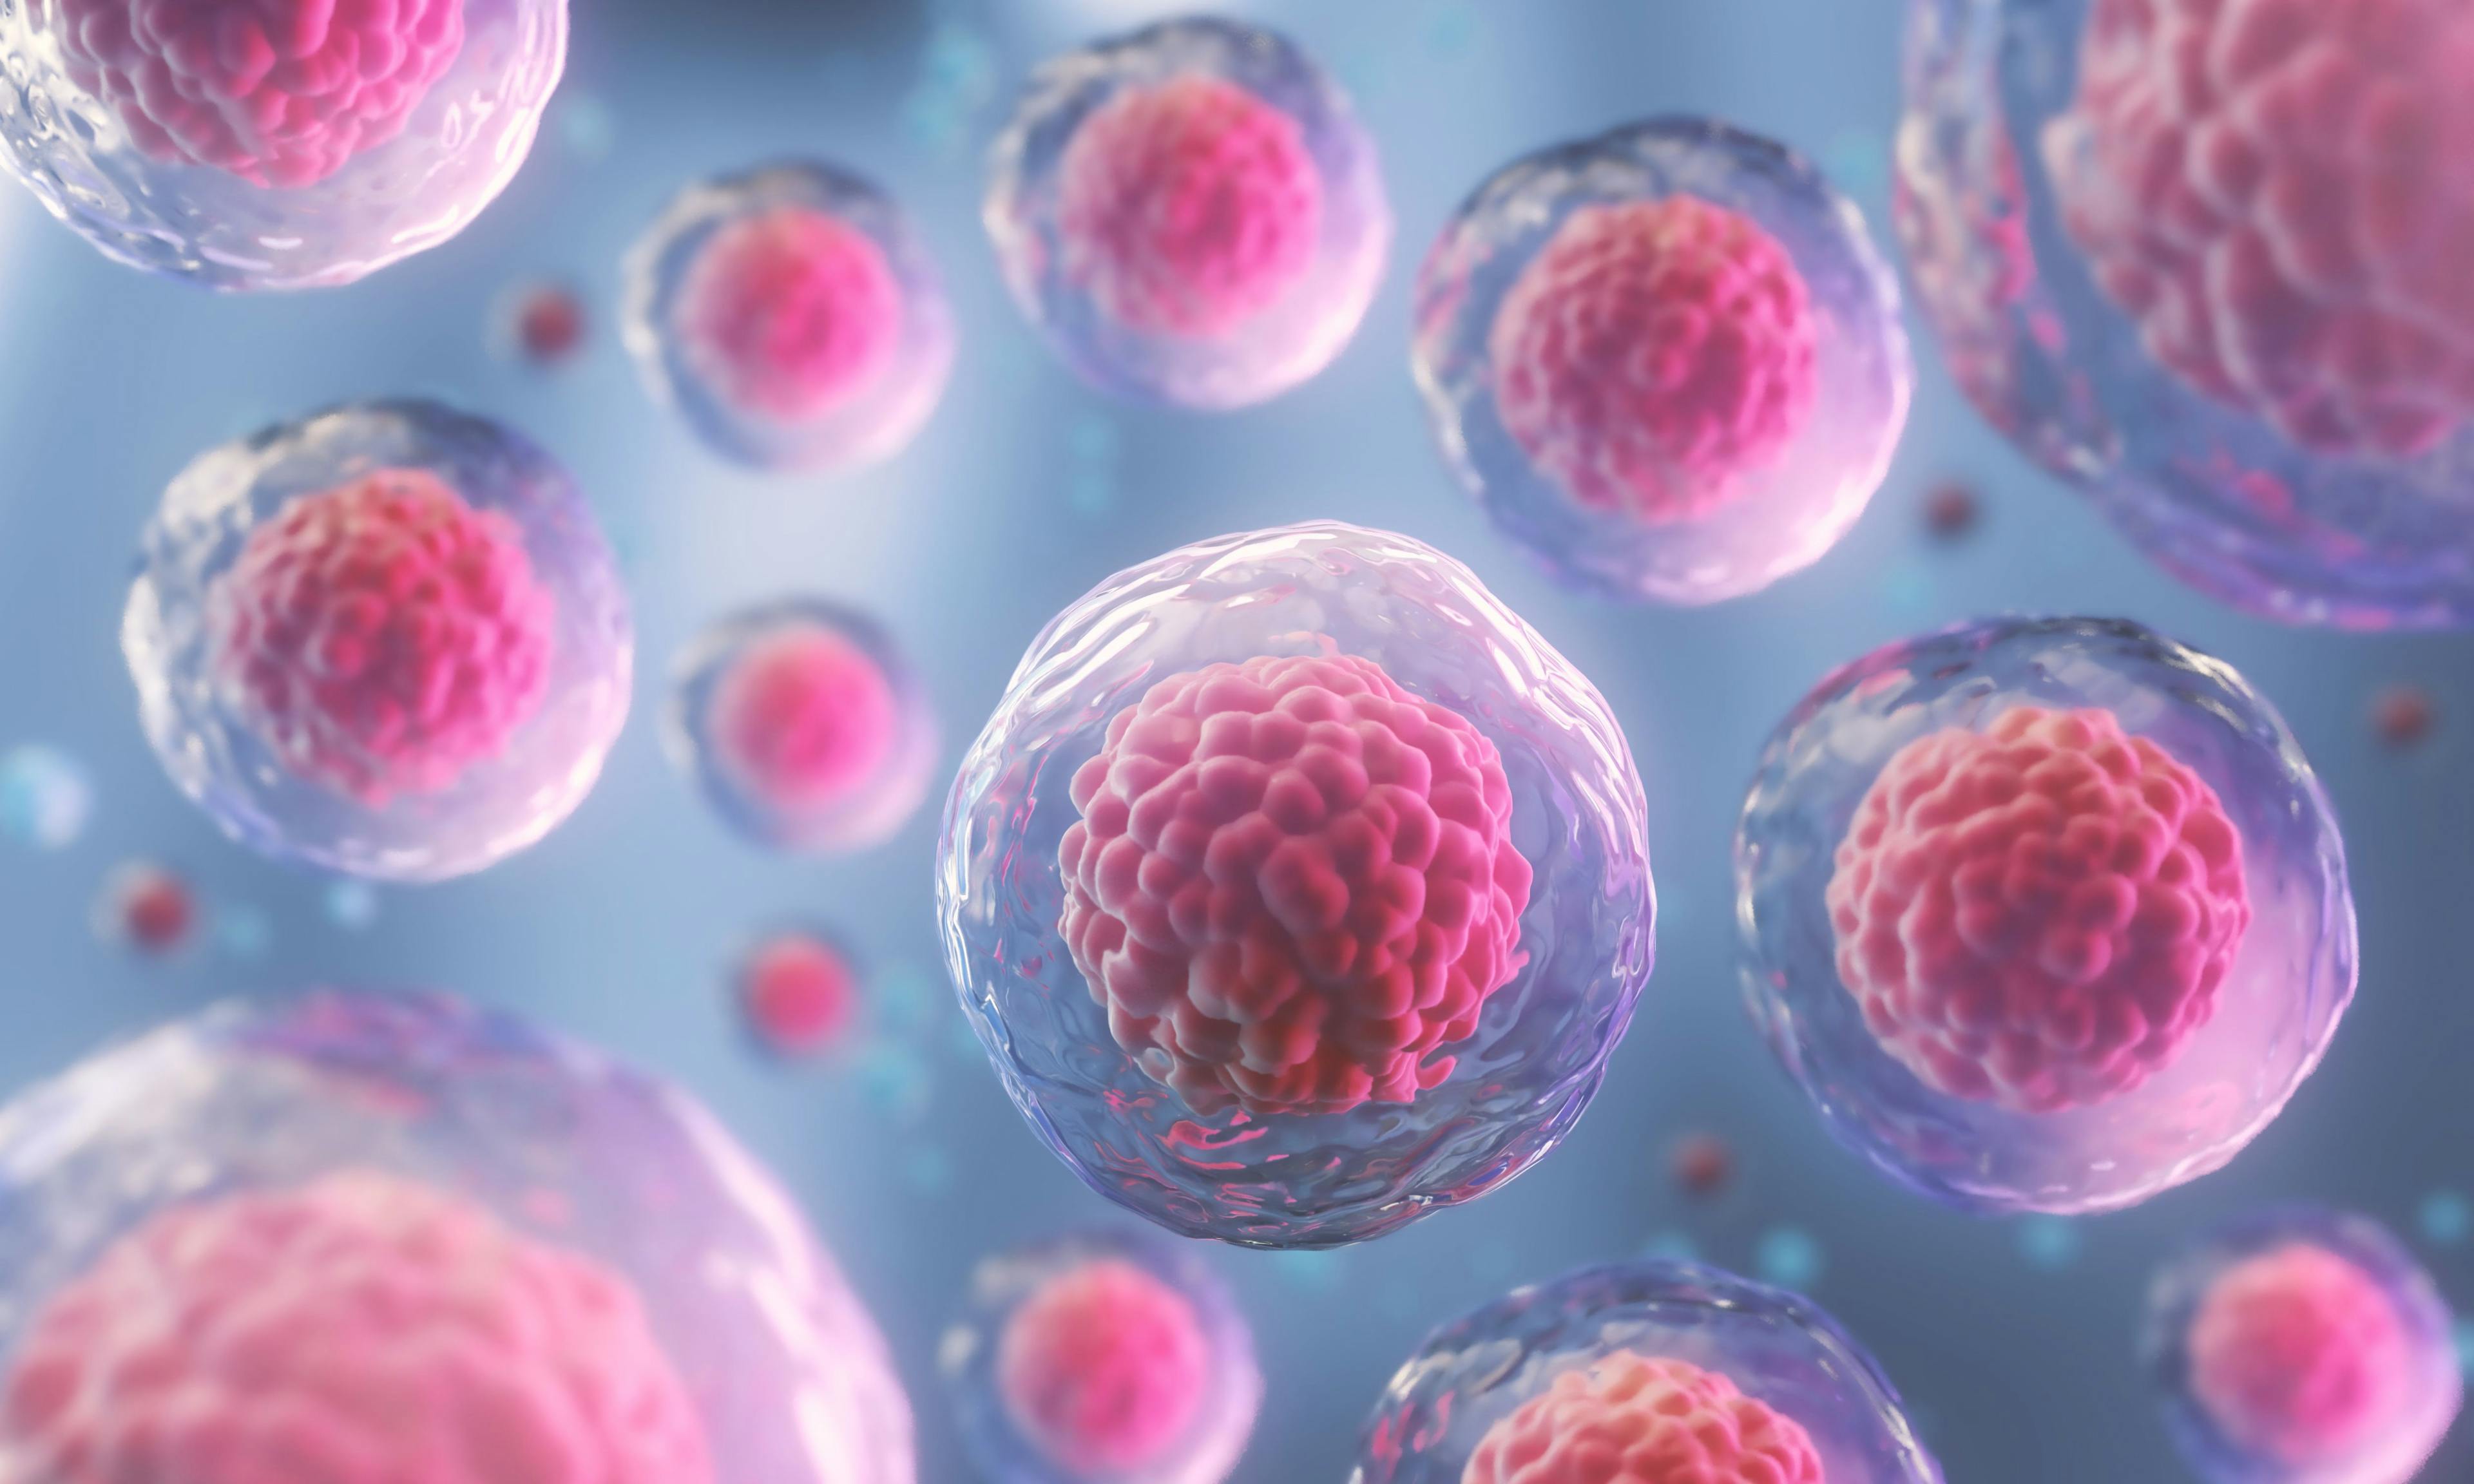 Patients with chemotherapy-refractory, high-risk acute myeloid leukemia achieved promising benefit from treatment with ficlatuzumab and cytarabine.